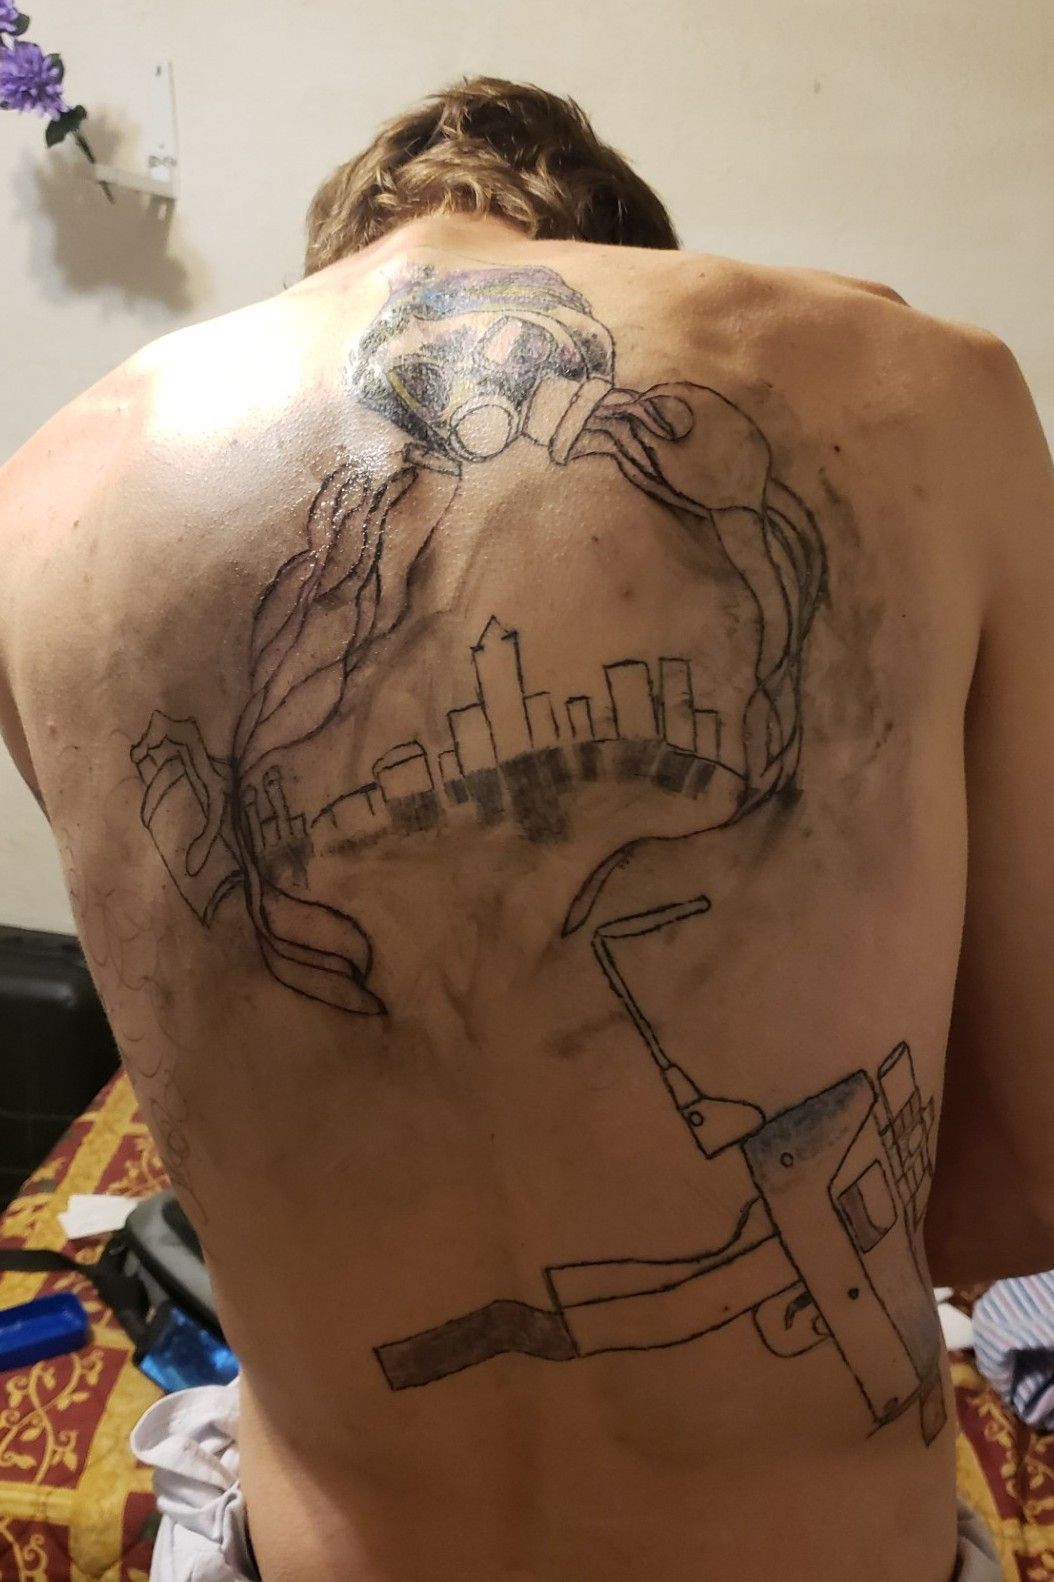 Desert Nik Tattoo  Little traditional PUBG helmet for joelpin It was an  honour and loads of fun too              